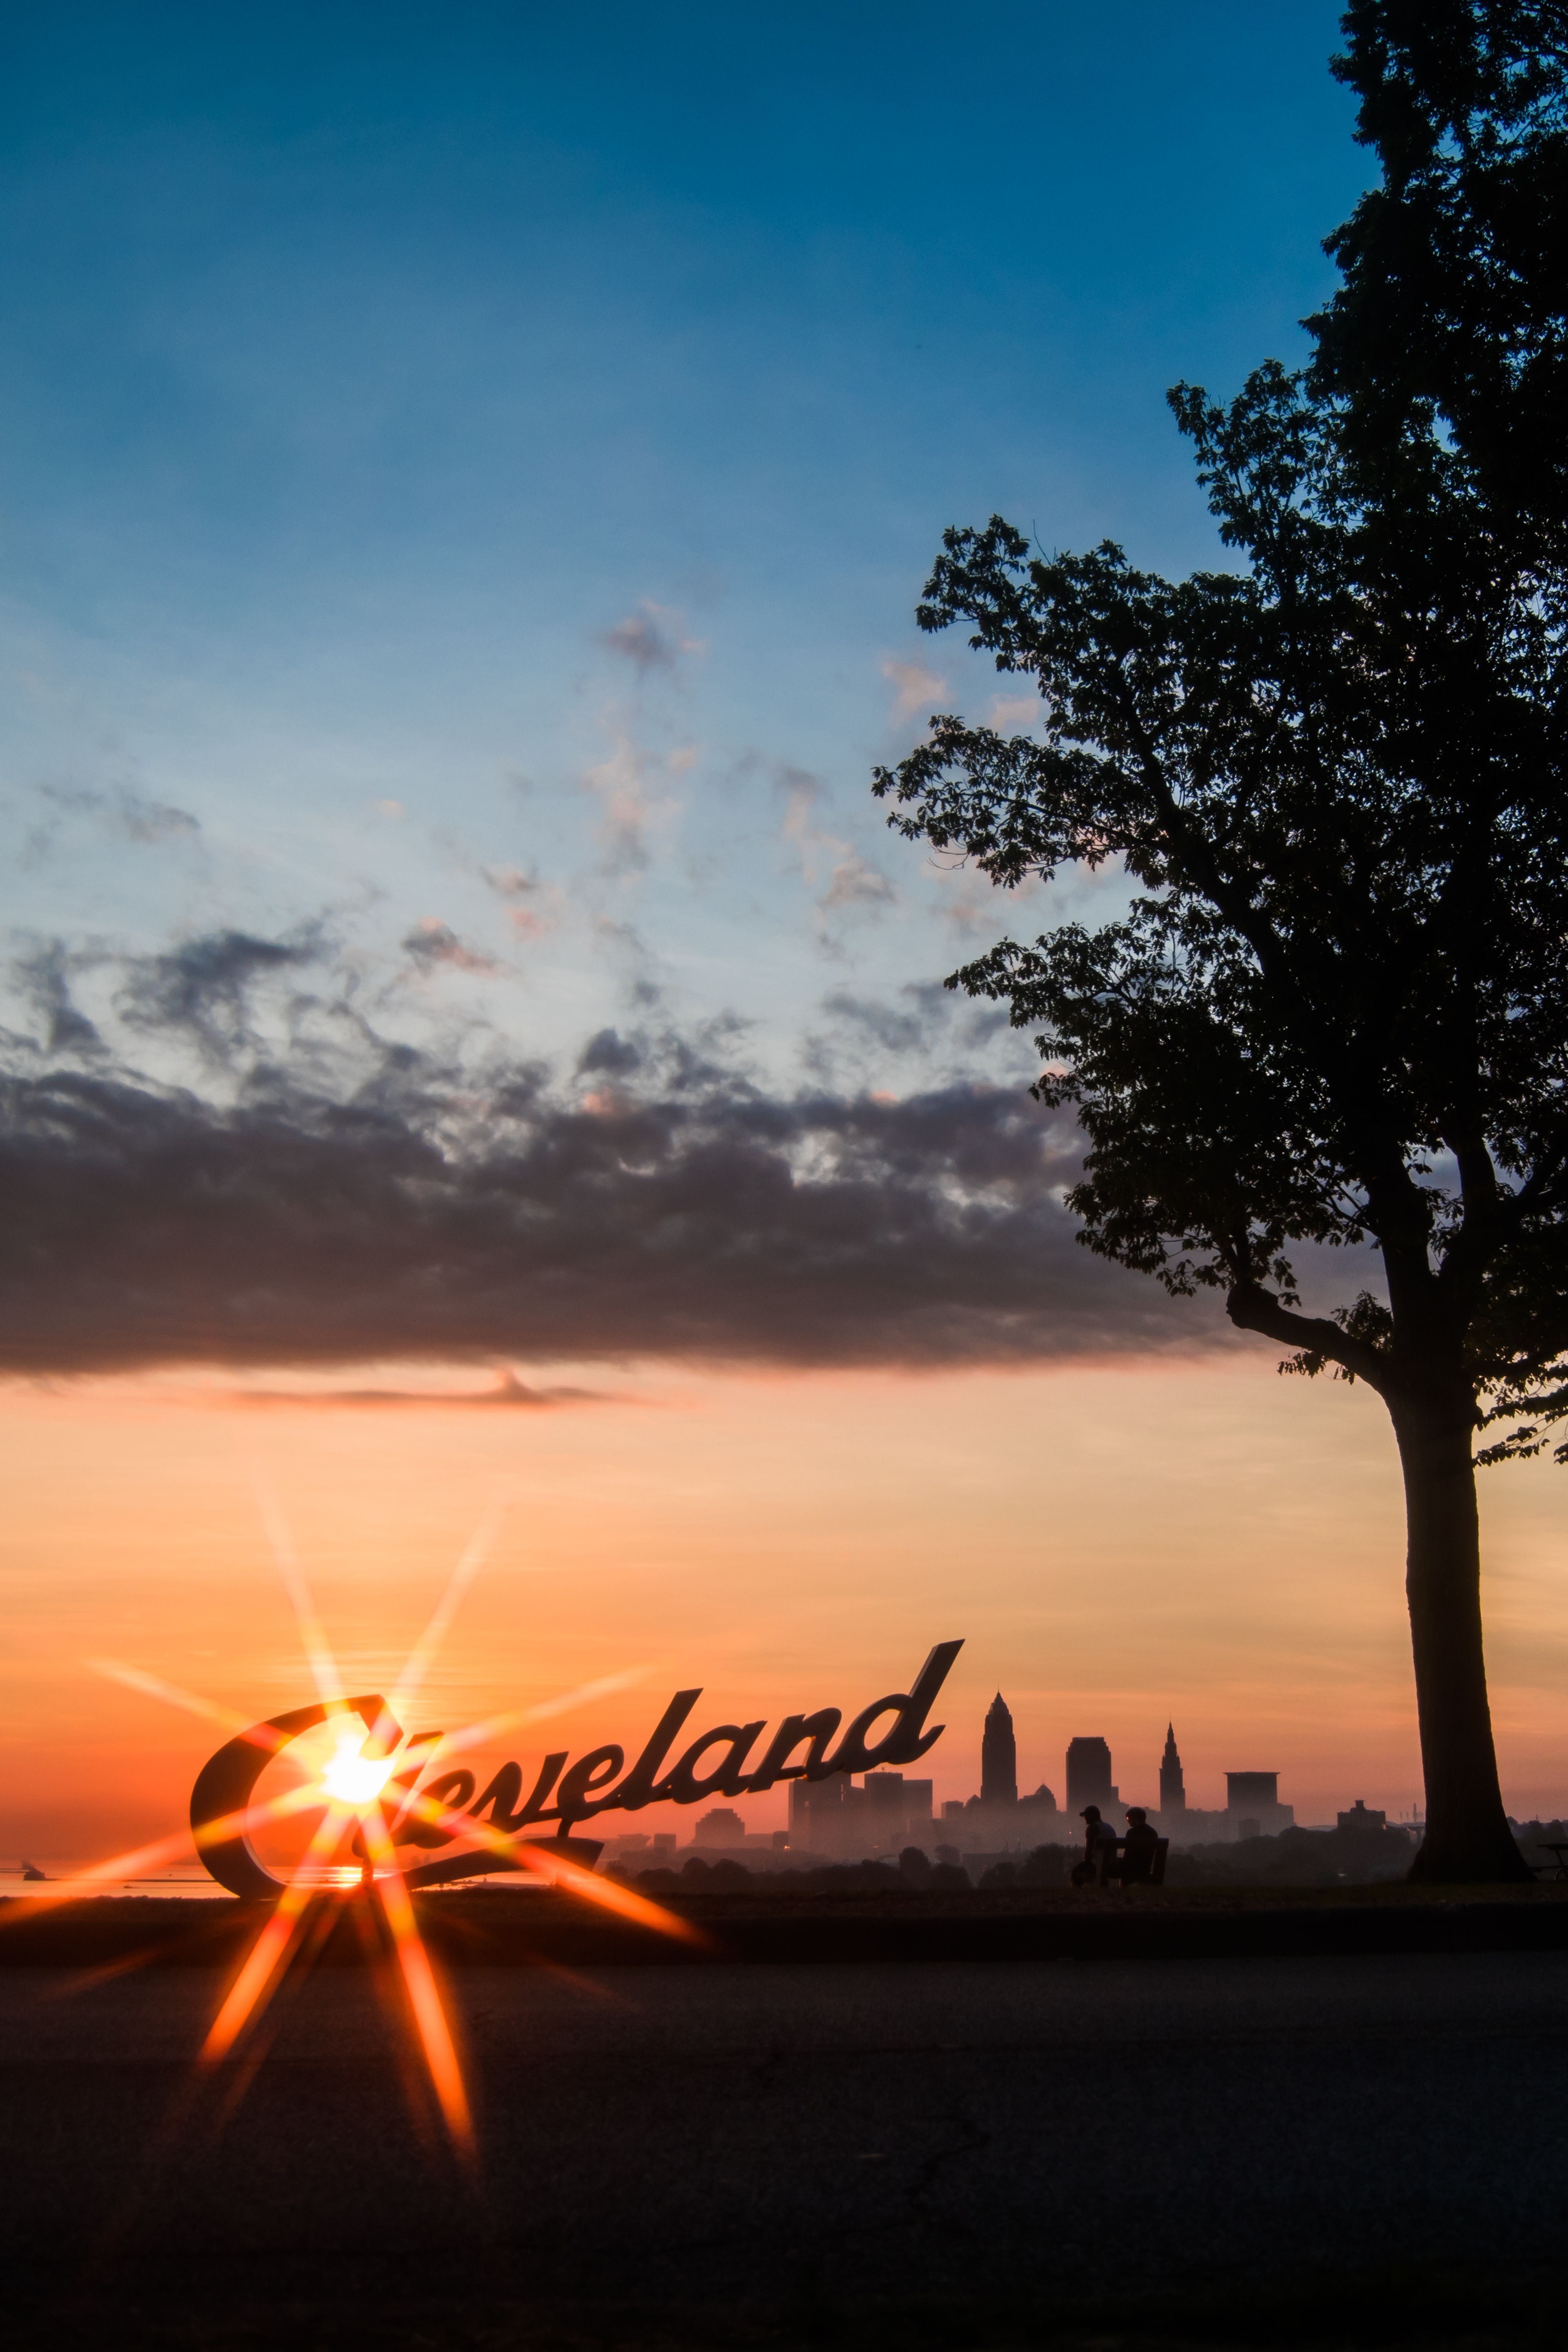 cities, sunset, silhouettes, night city, inscription, sunlight, cleveland Full HD